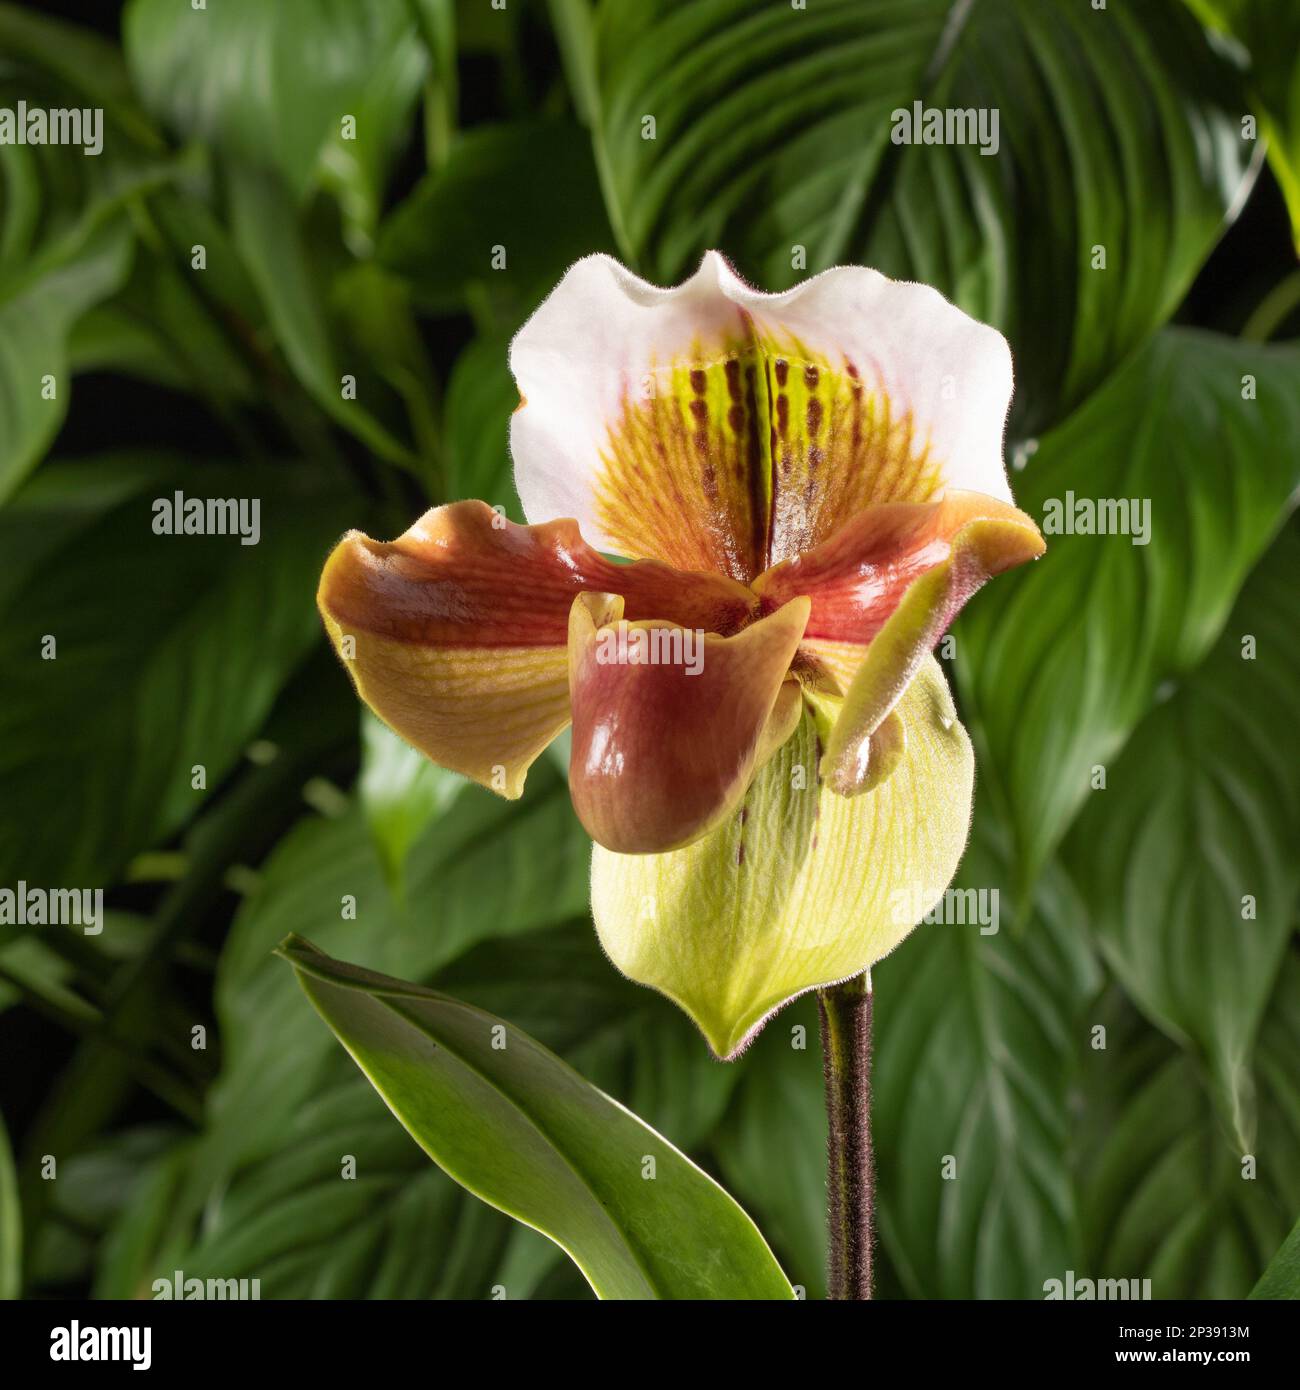 Paphiopedilum orchid flower close-up against the background of the leaves of home plants. Stock Photo